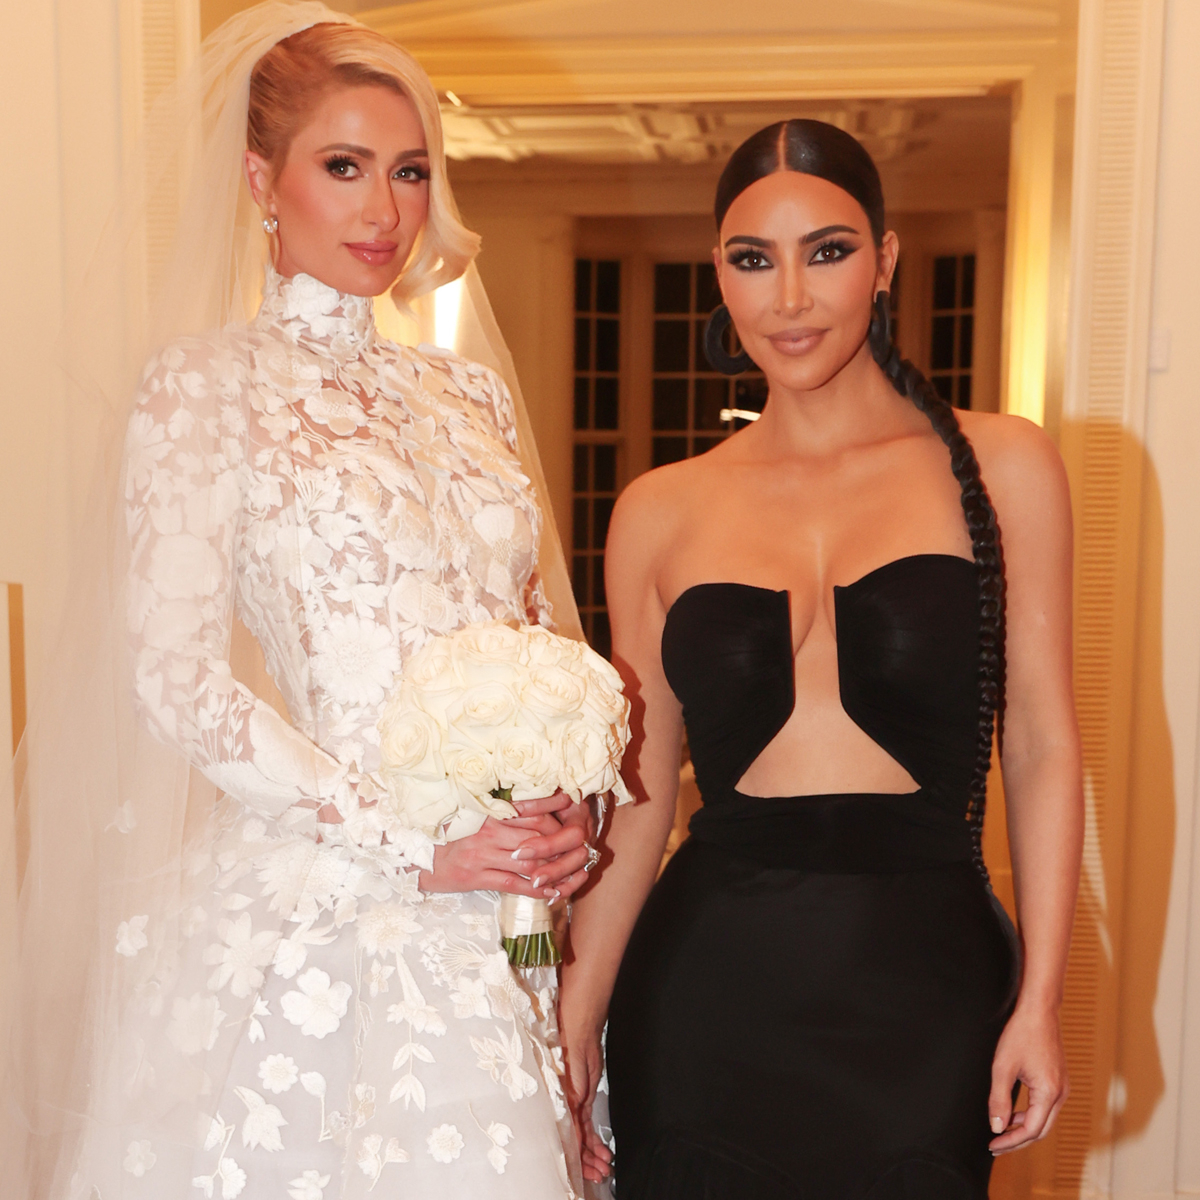 Kim Kardashian and Paris Hilton Almost Dressed as Themselves for